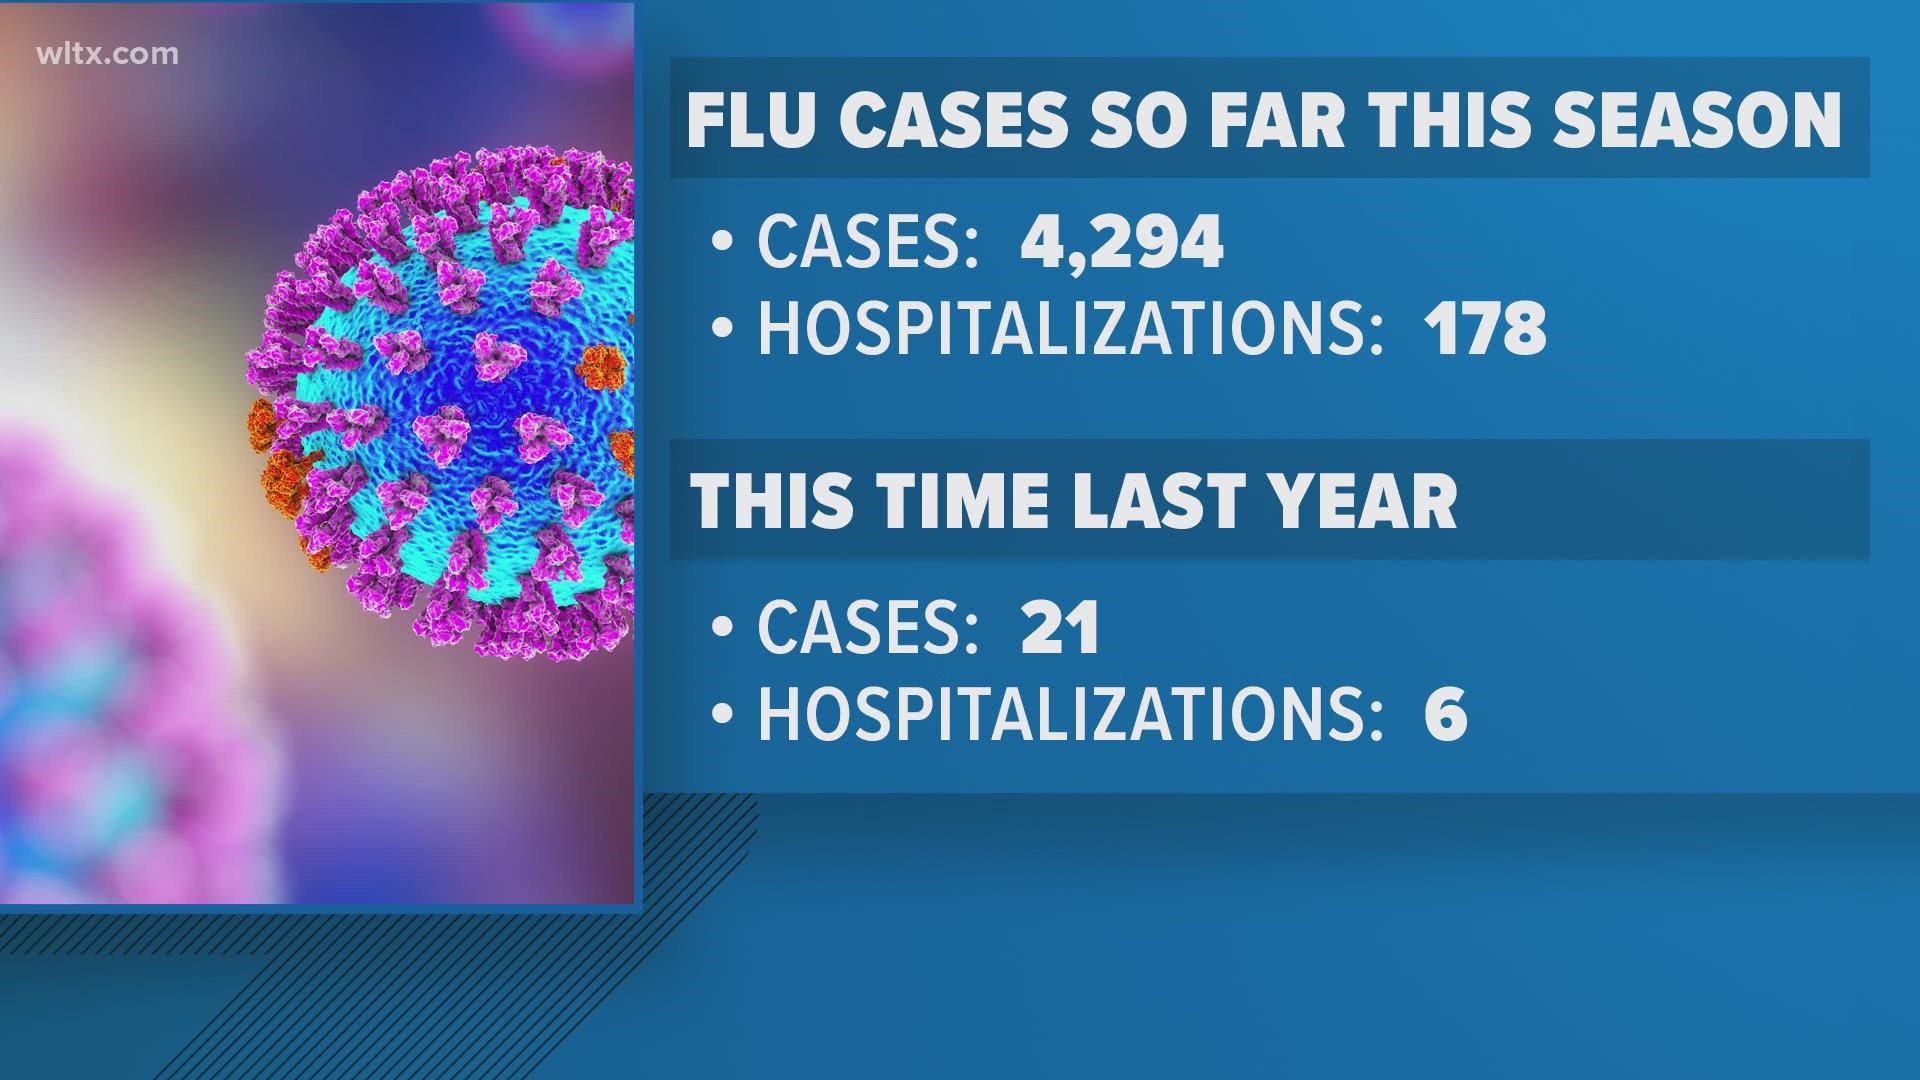 South Carolina has seen its first child flu-related death of the current season, the state's health agency said.